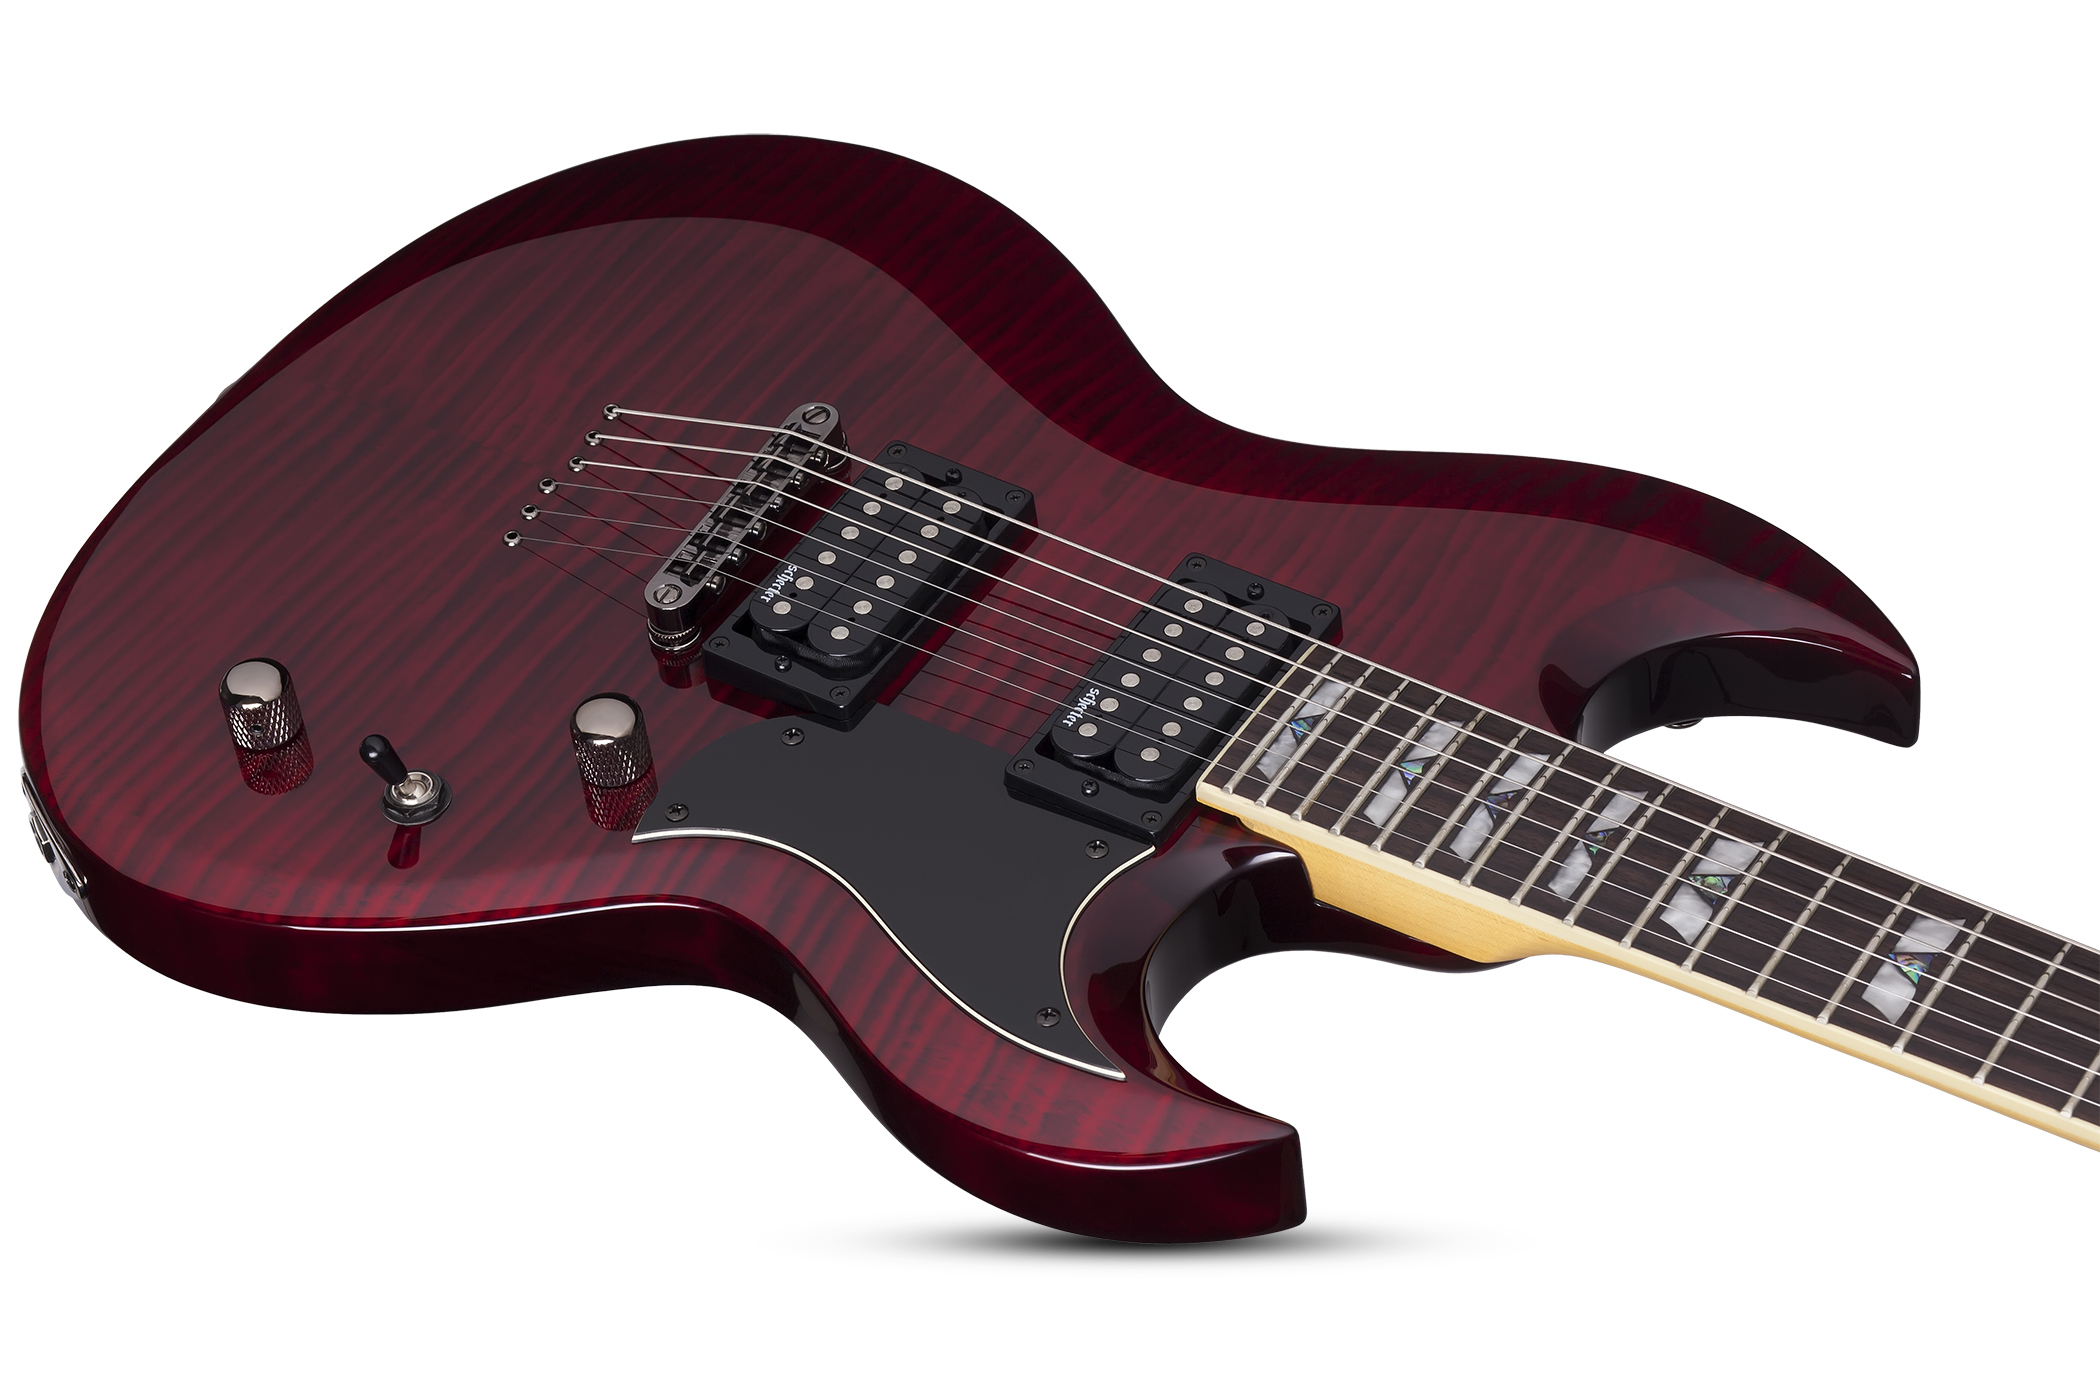 Schecter S-ii Omen Extreme 2h Ht Rw - Black Cherry - Metal electric guitar - Variation 2